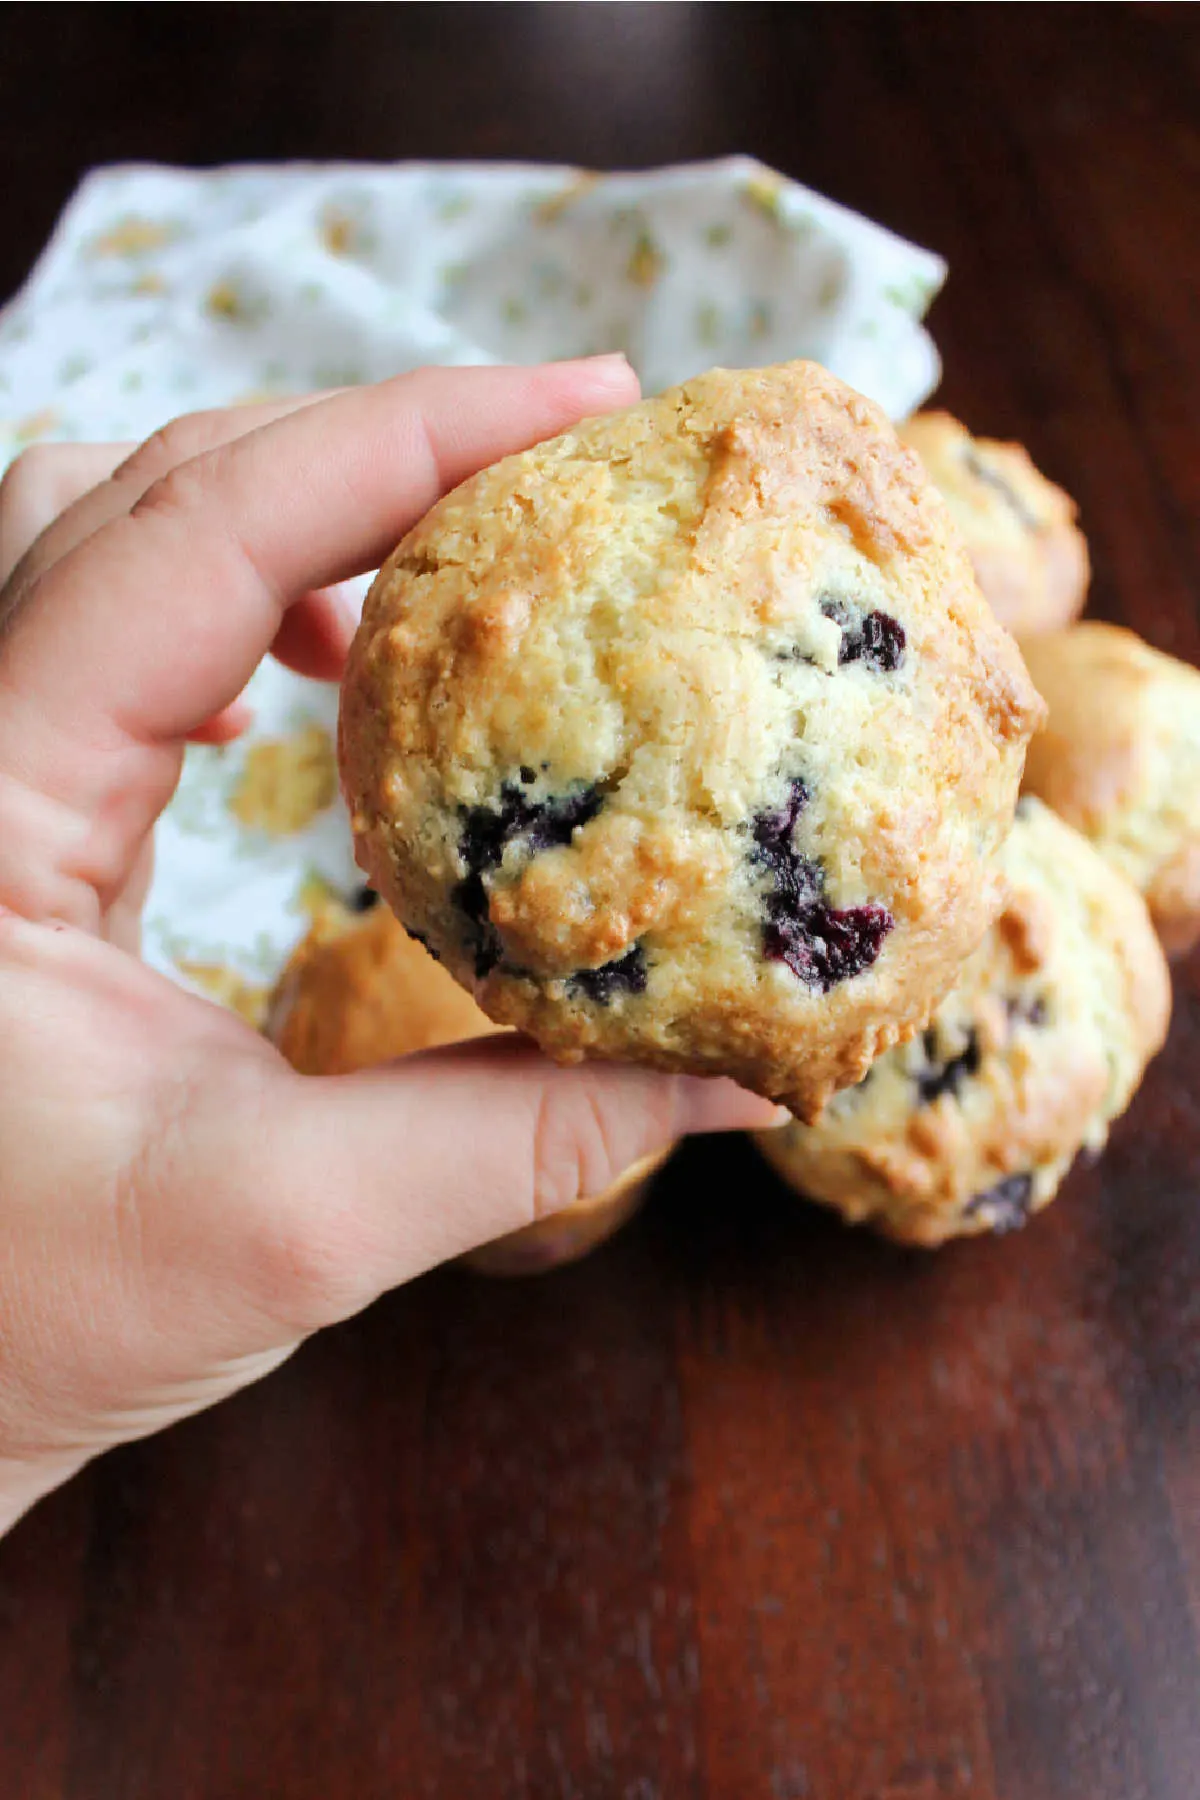 Hand holding whole blueberry muffin with soft sour cream batter and lots of fresh berries.